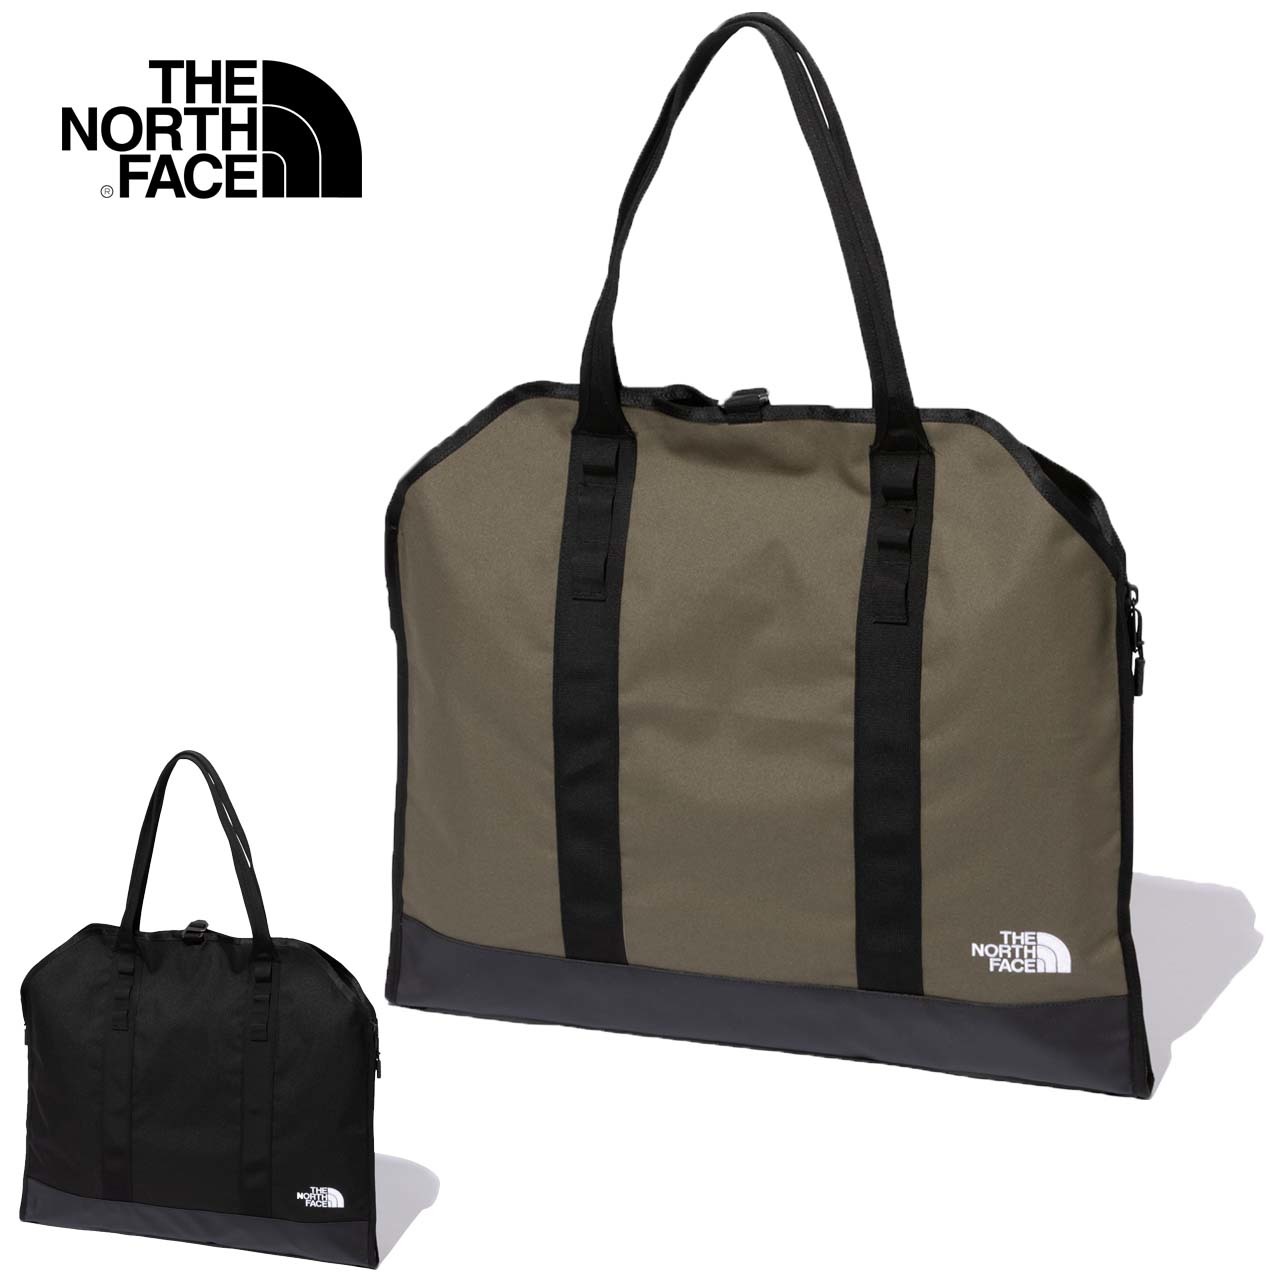 THE NORTH FACE [ザ・ノース・フェイス] Fieludens Log Carrier [NM82203] _f0051306_09390624.jpg